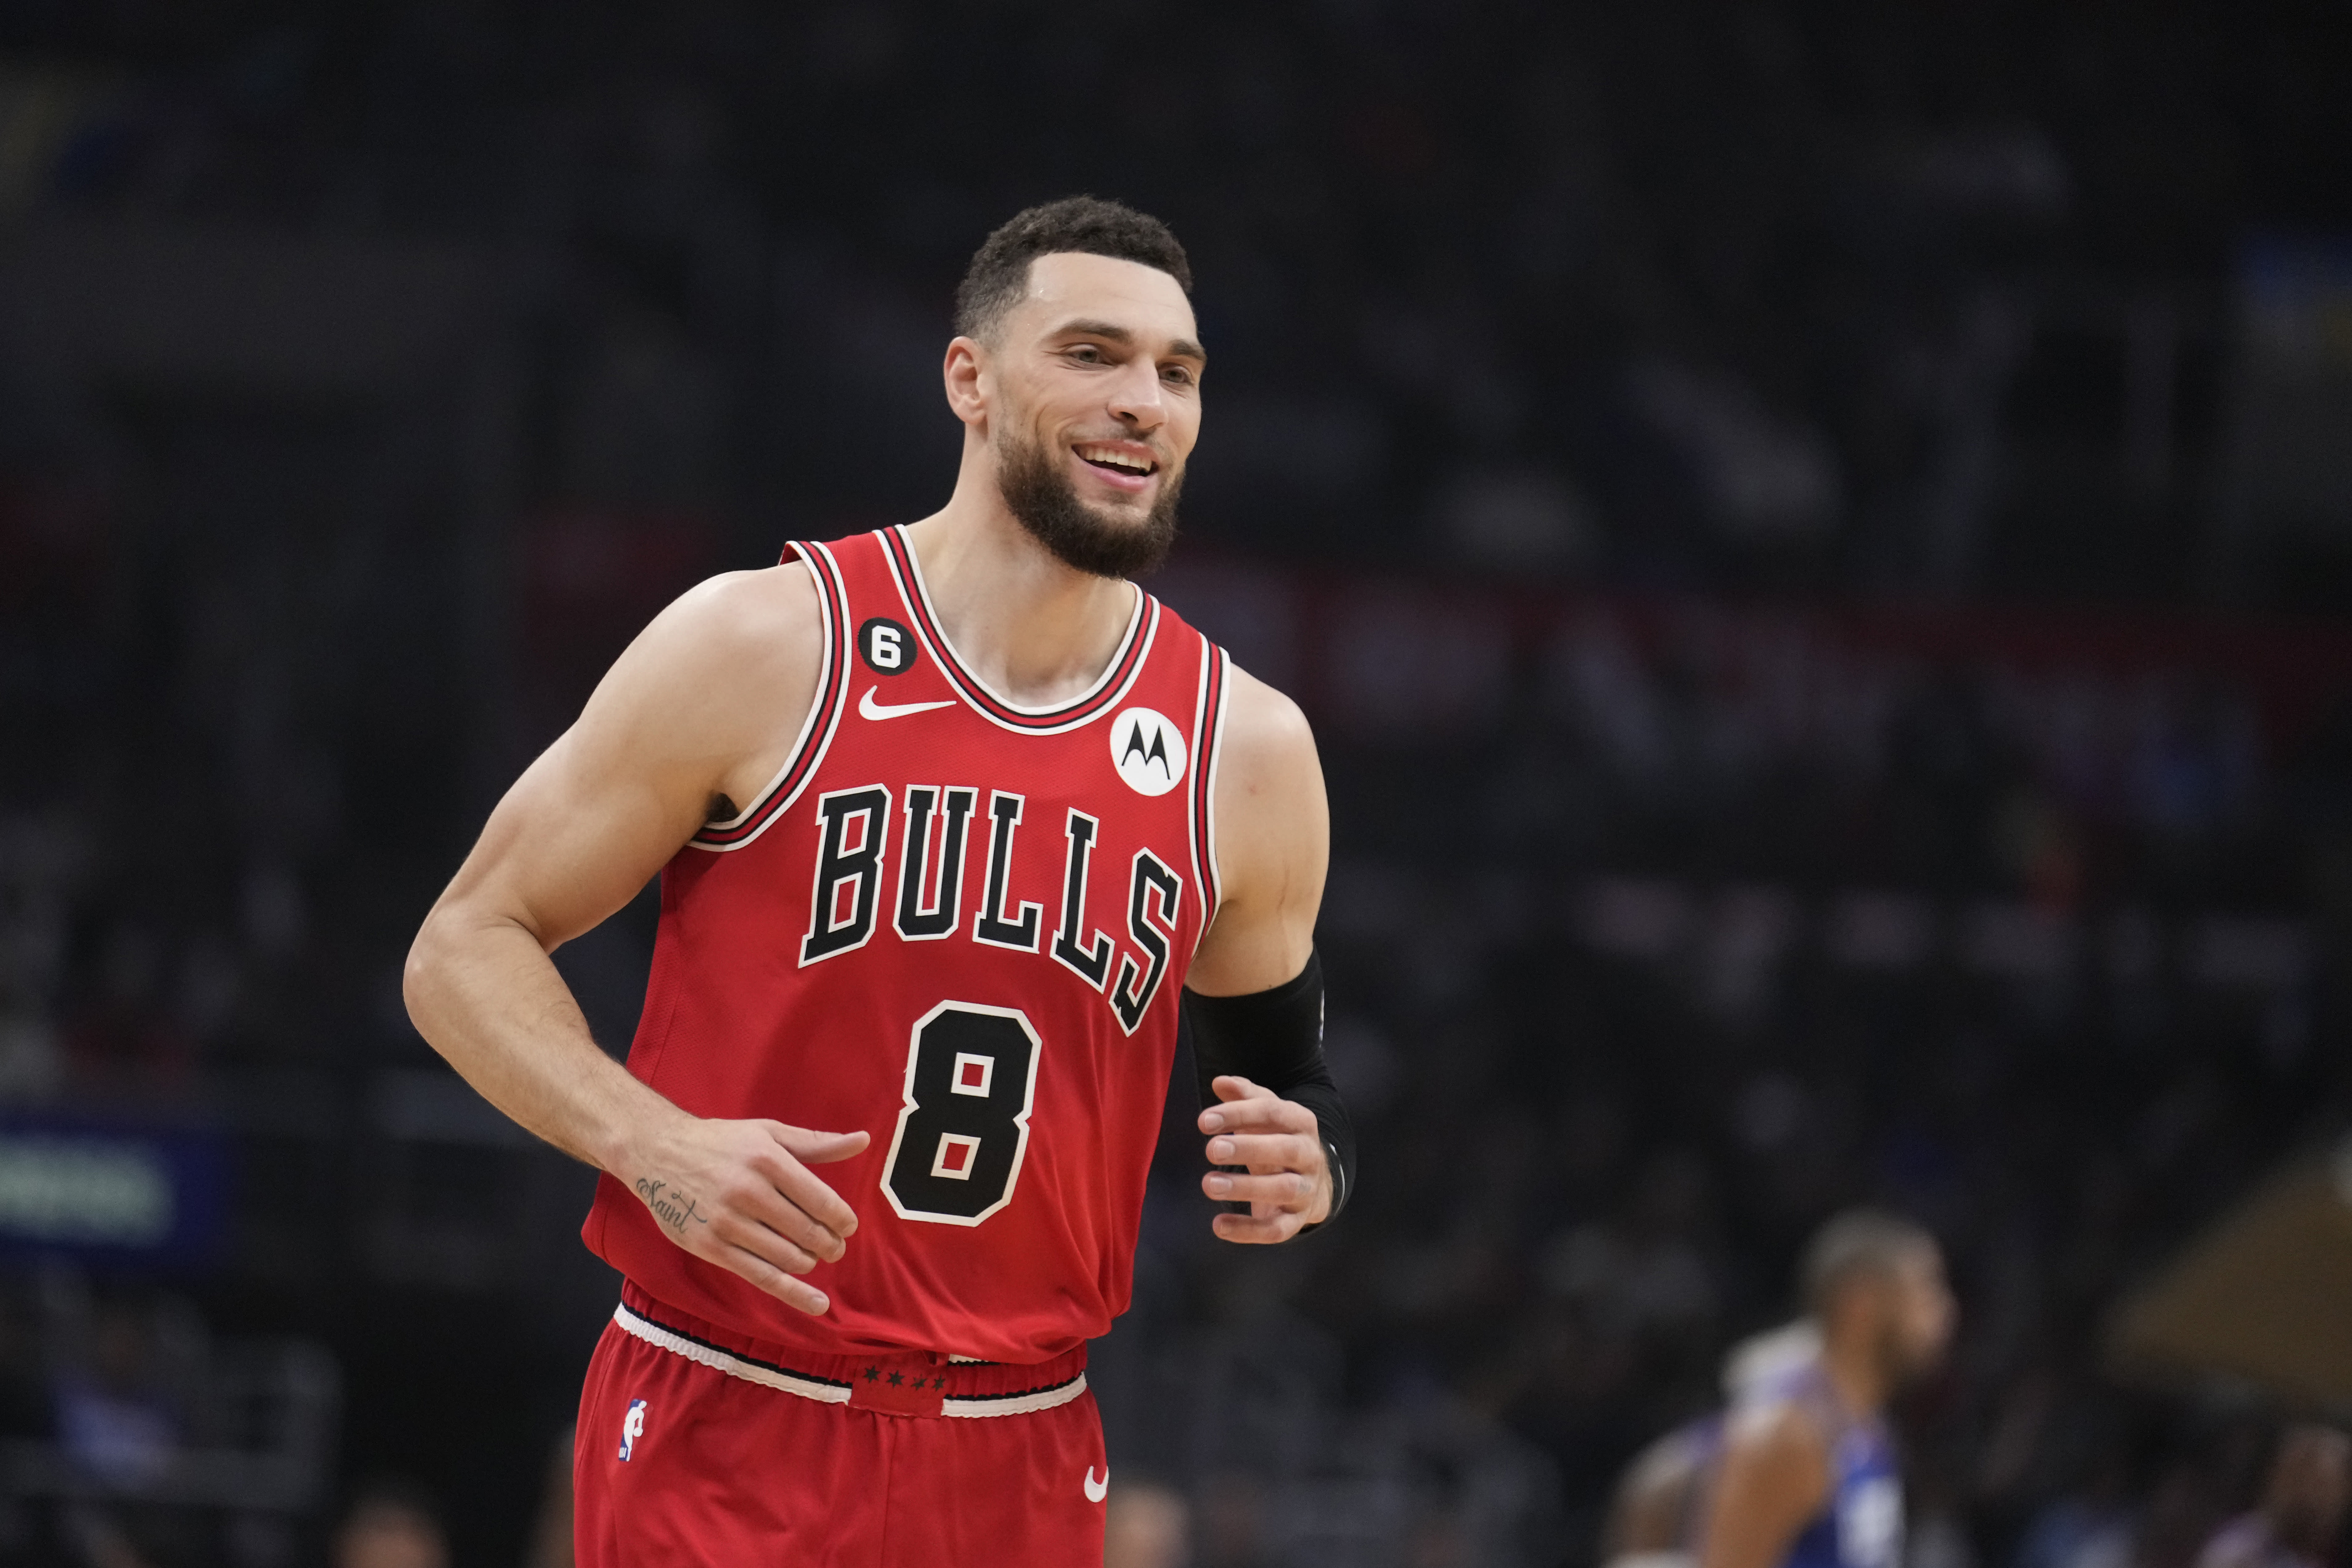 Bulls guard Zach LaVine says he's 'a little bit ahead' of schedule on ankle recovery